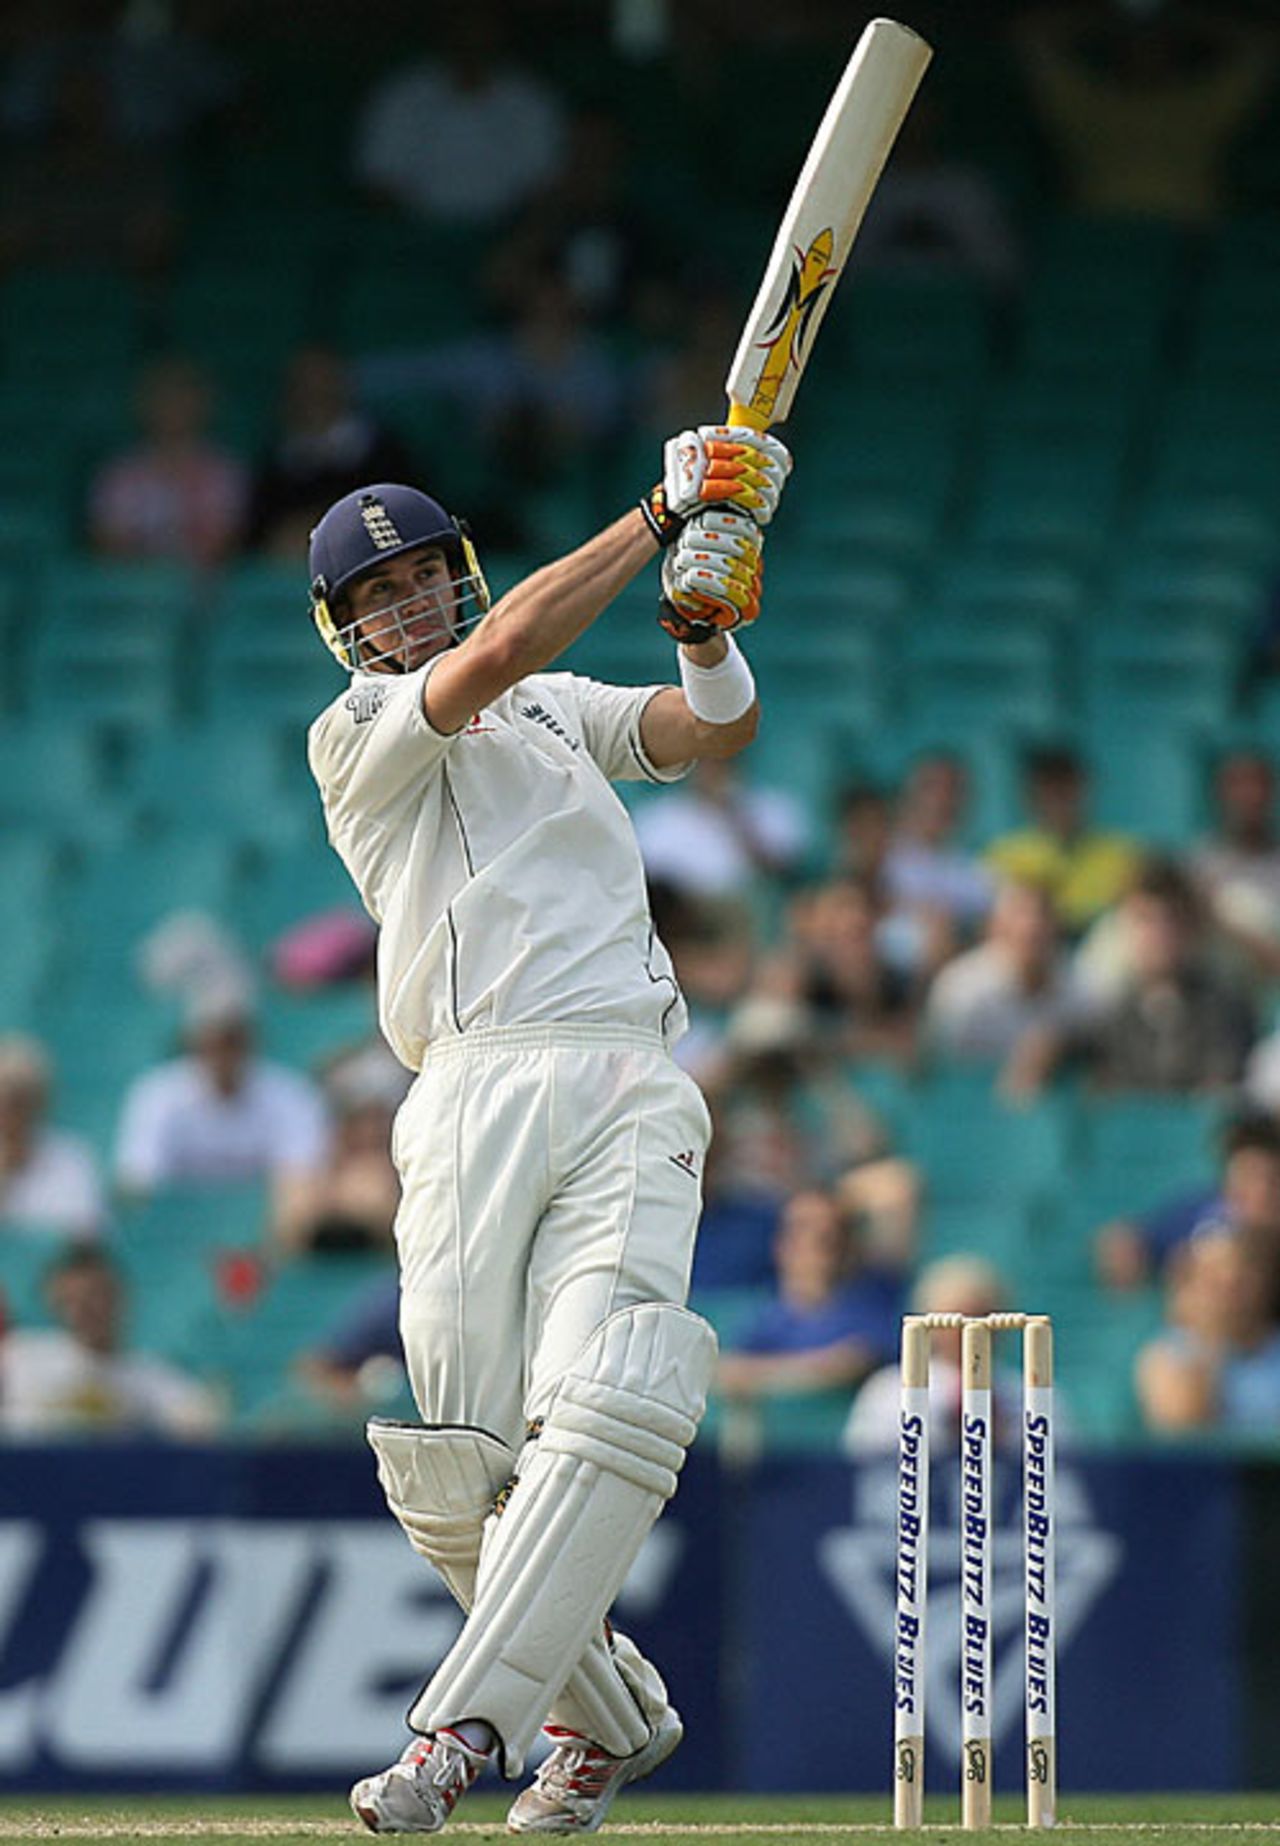 Kevin Pietersen launches one over midwicket, New South Wales v England, Sydney, November 13, 2006